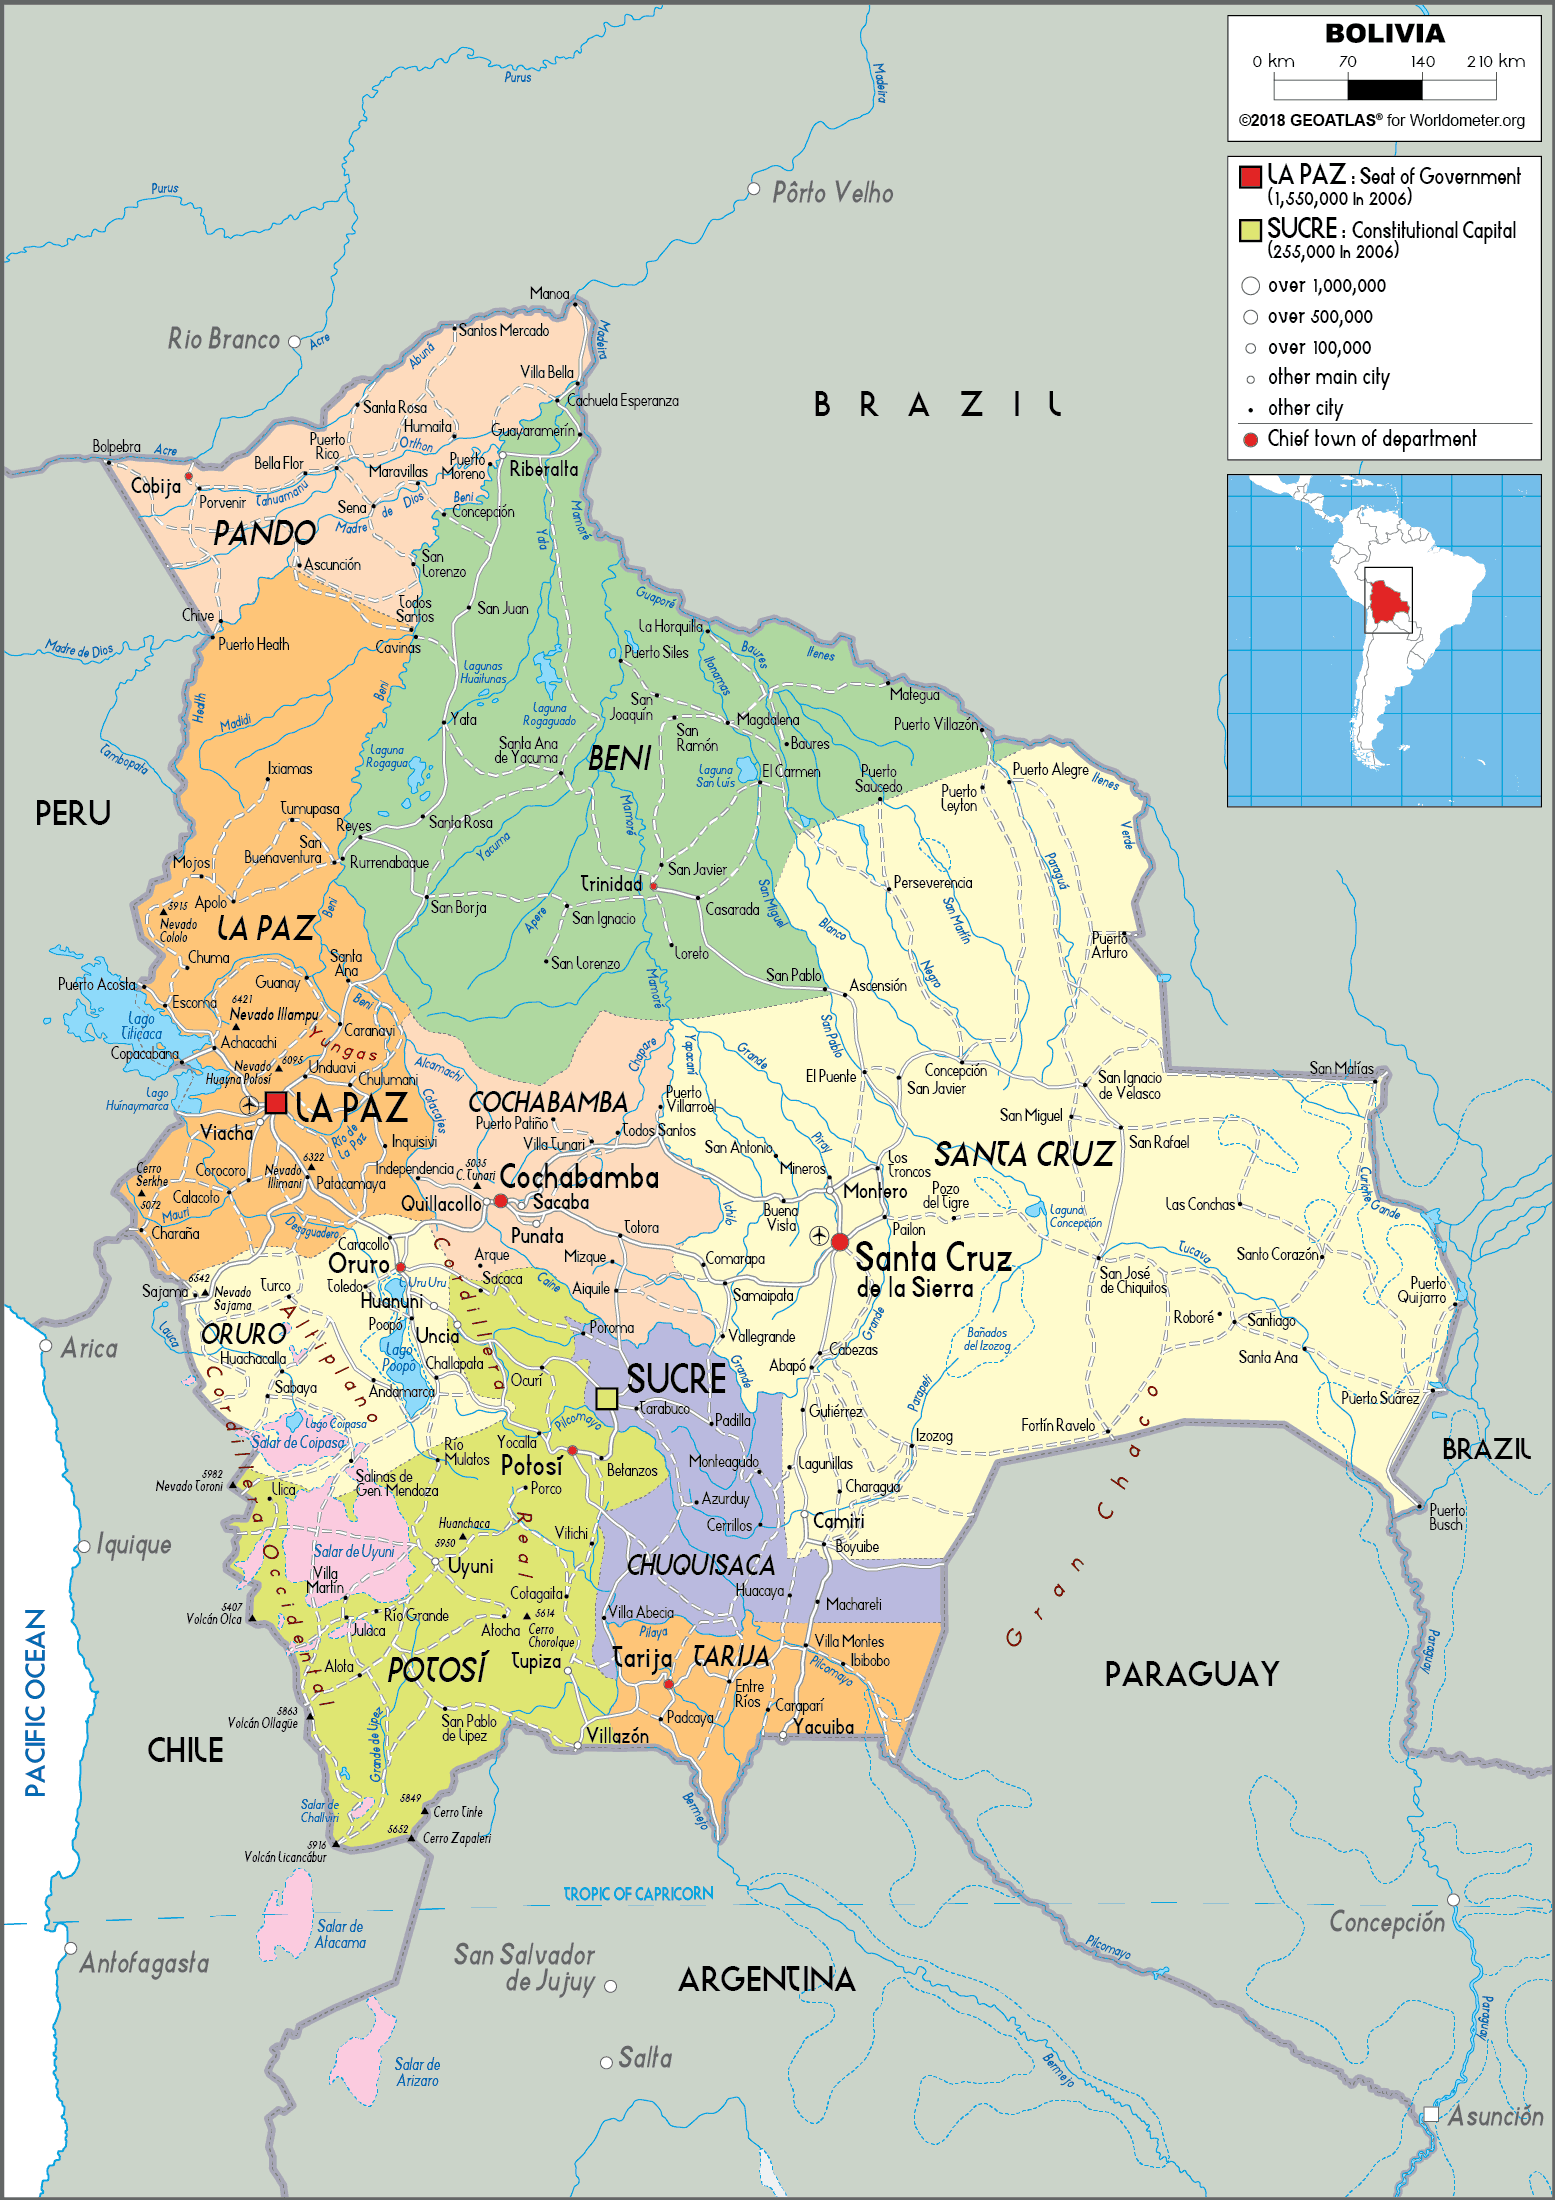 Large size Political Map of Bolivia - Worldometer